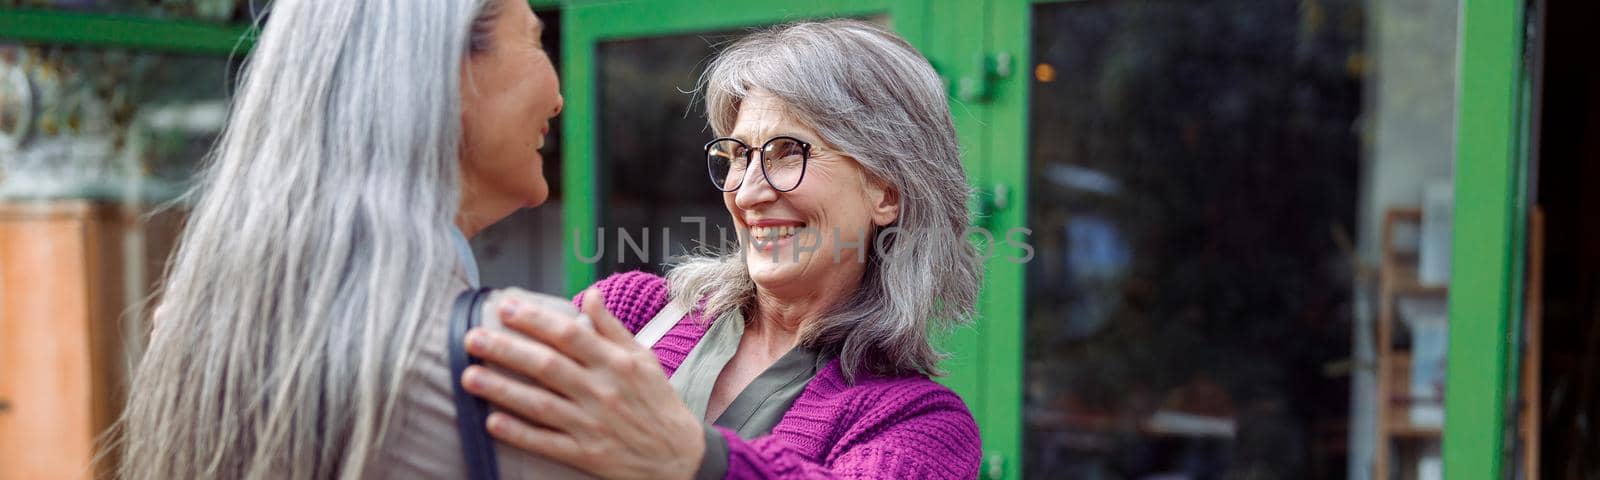 Smiling mature woman embraces female friend with long silver hair meeting on modern city street. Long-time friendship relationship